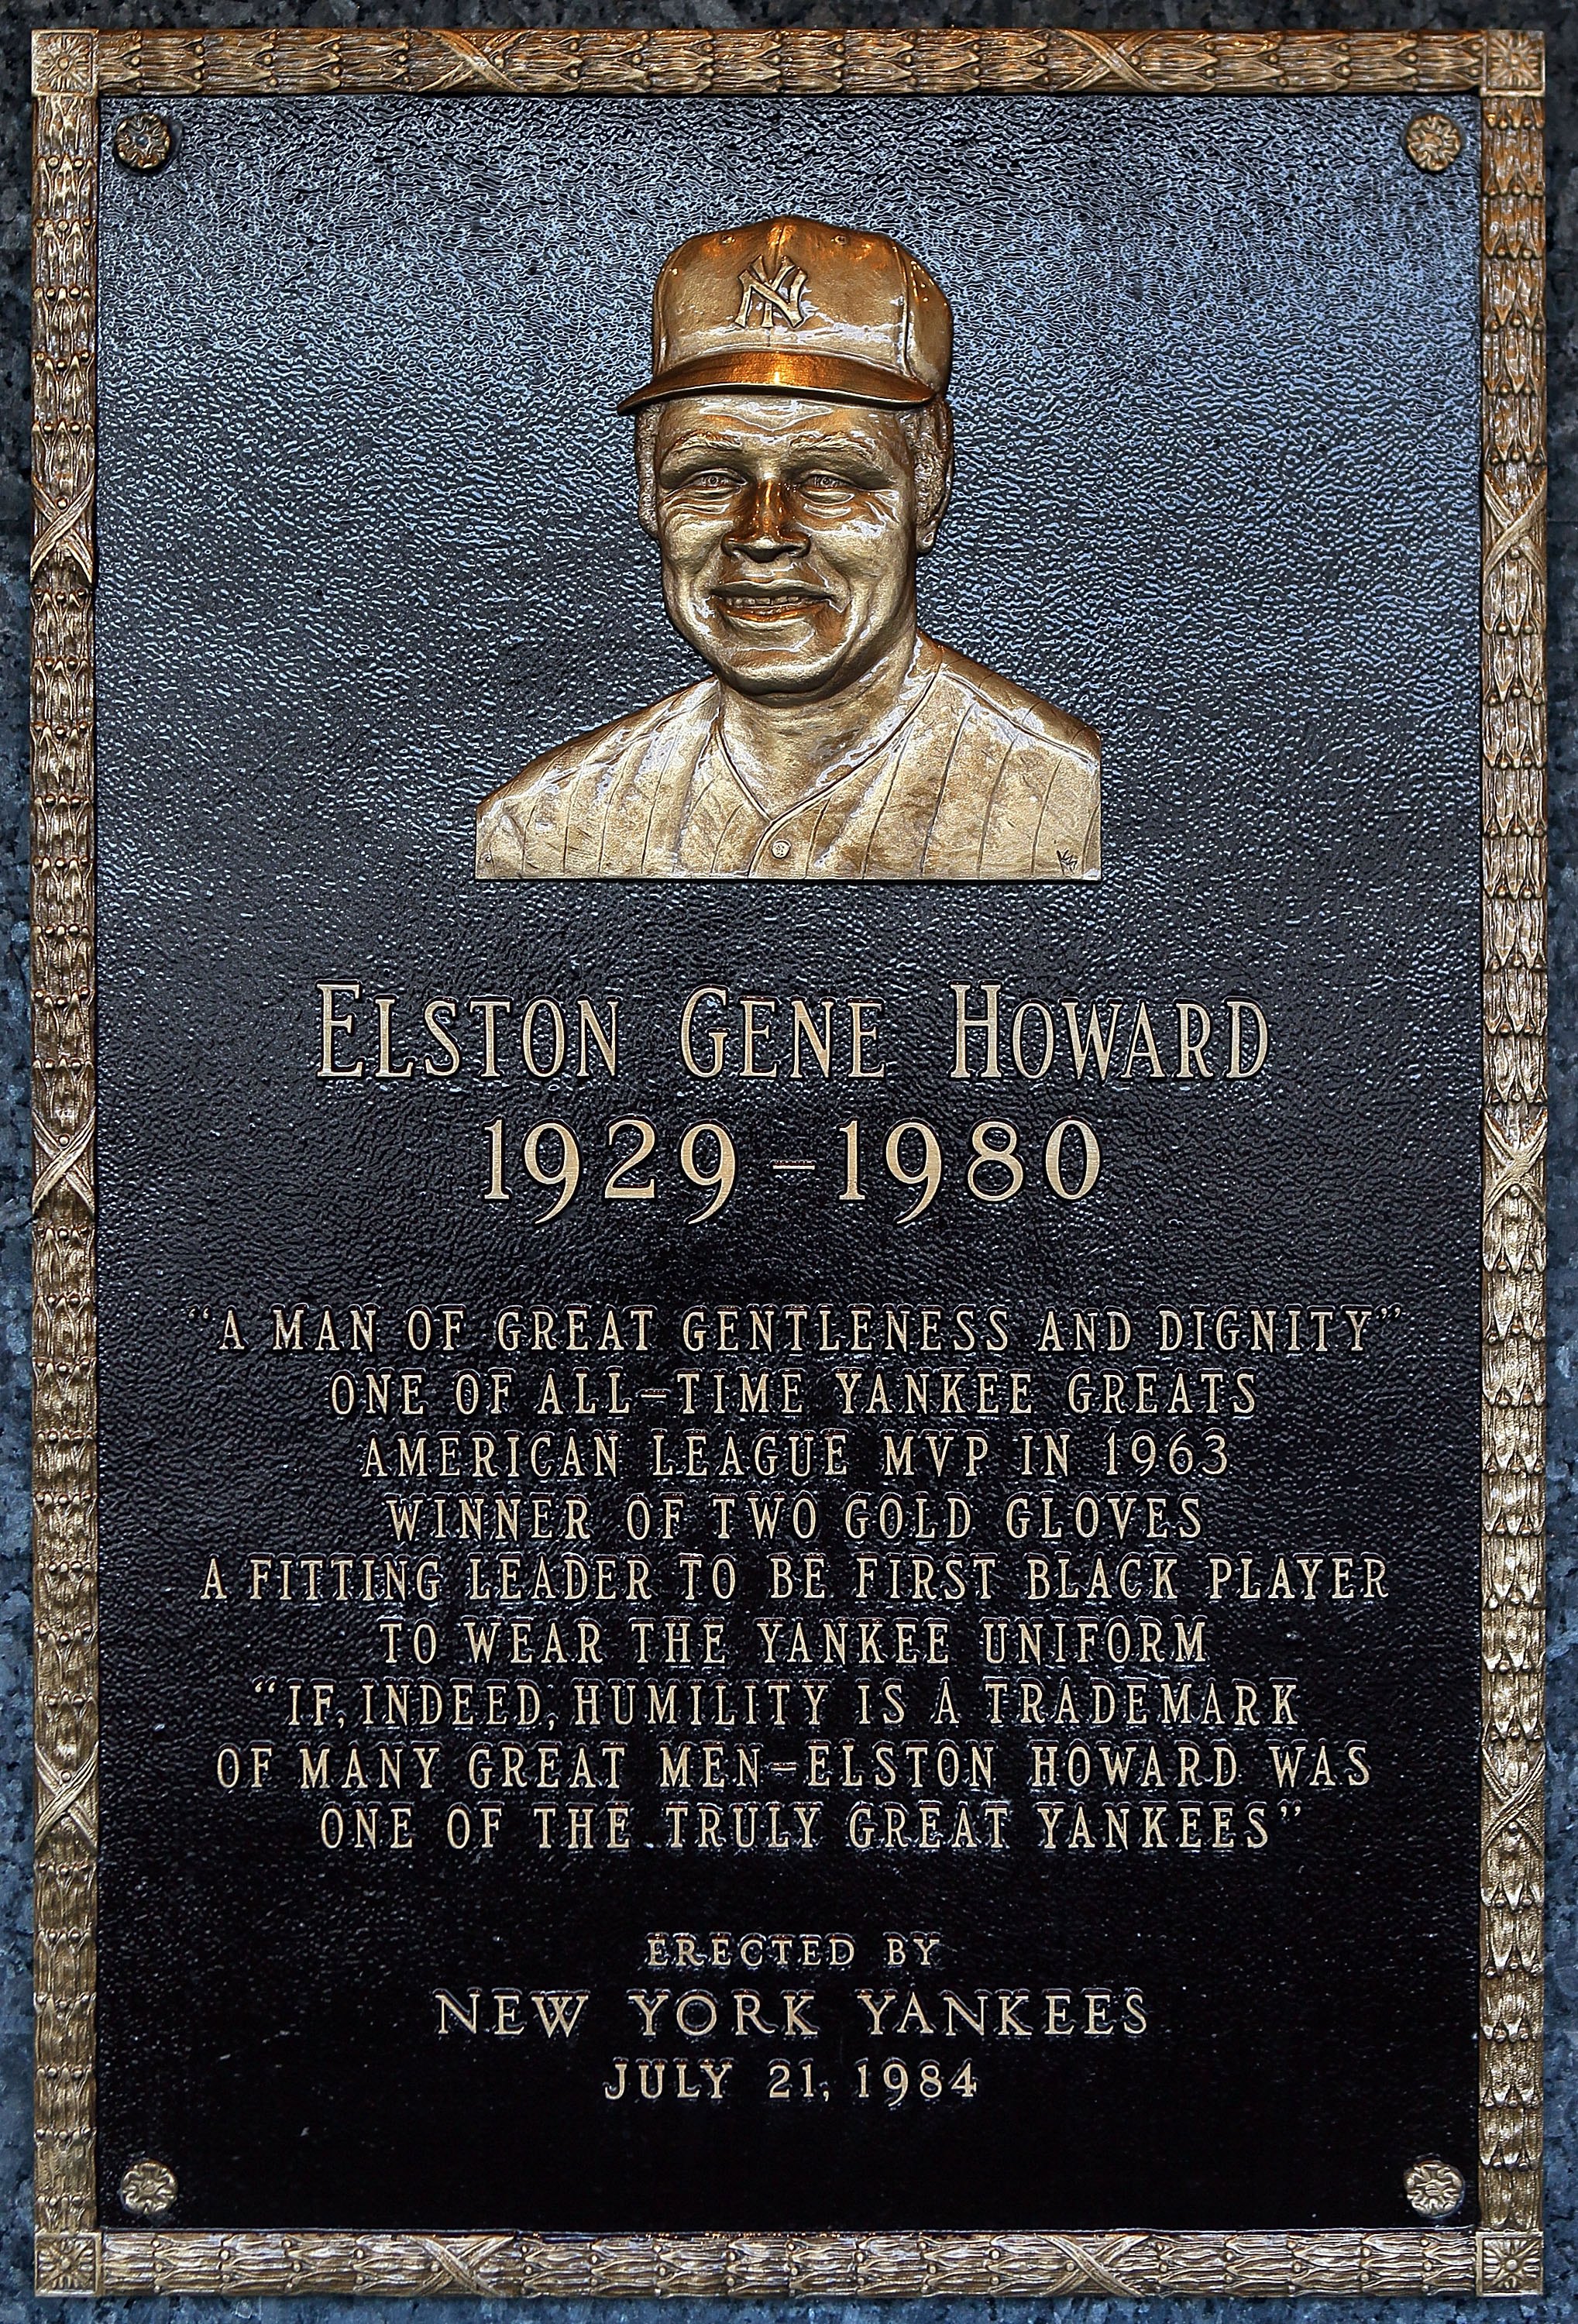 NEW YORK - MAY 02:  The plaque of Elston Howard is seen in Monument Park at Yankee Stadium prior to the game between the New York Yankees and the Chicago White Sox on May 2, 2010 in the Bronx borough of New York City. The Yankees defeated the White Sox 12